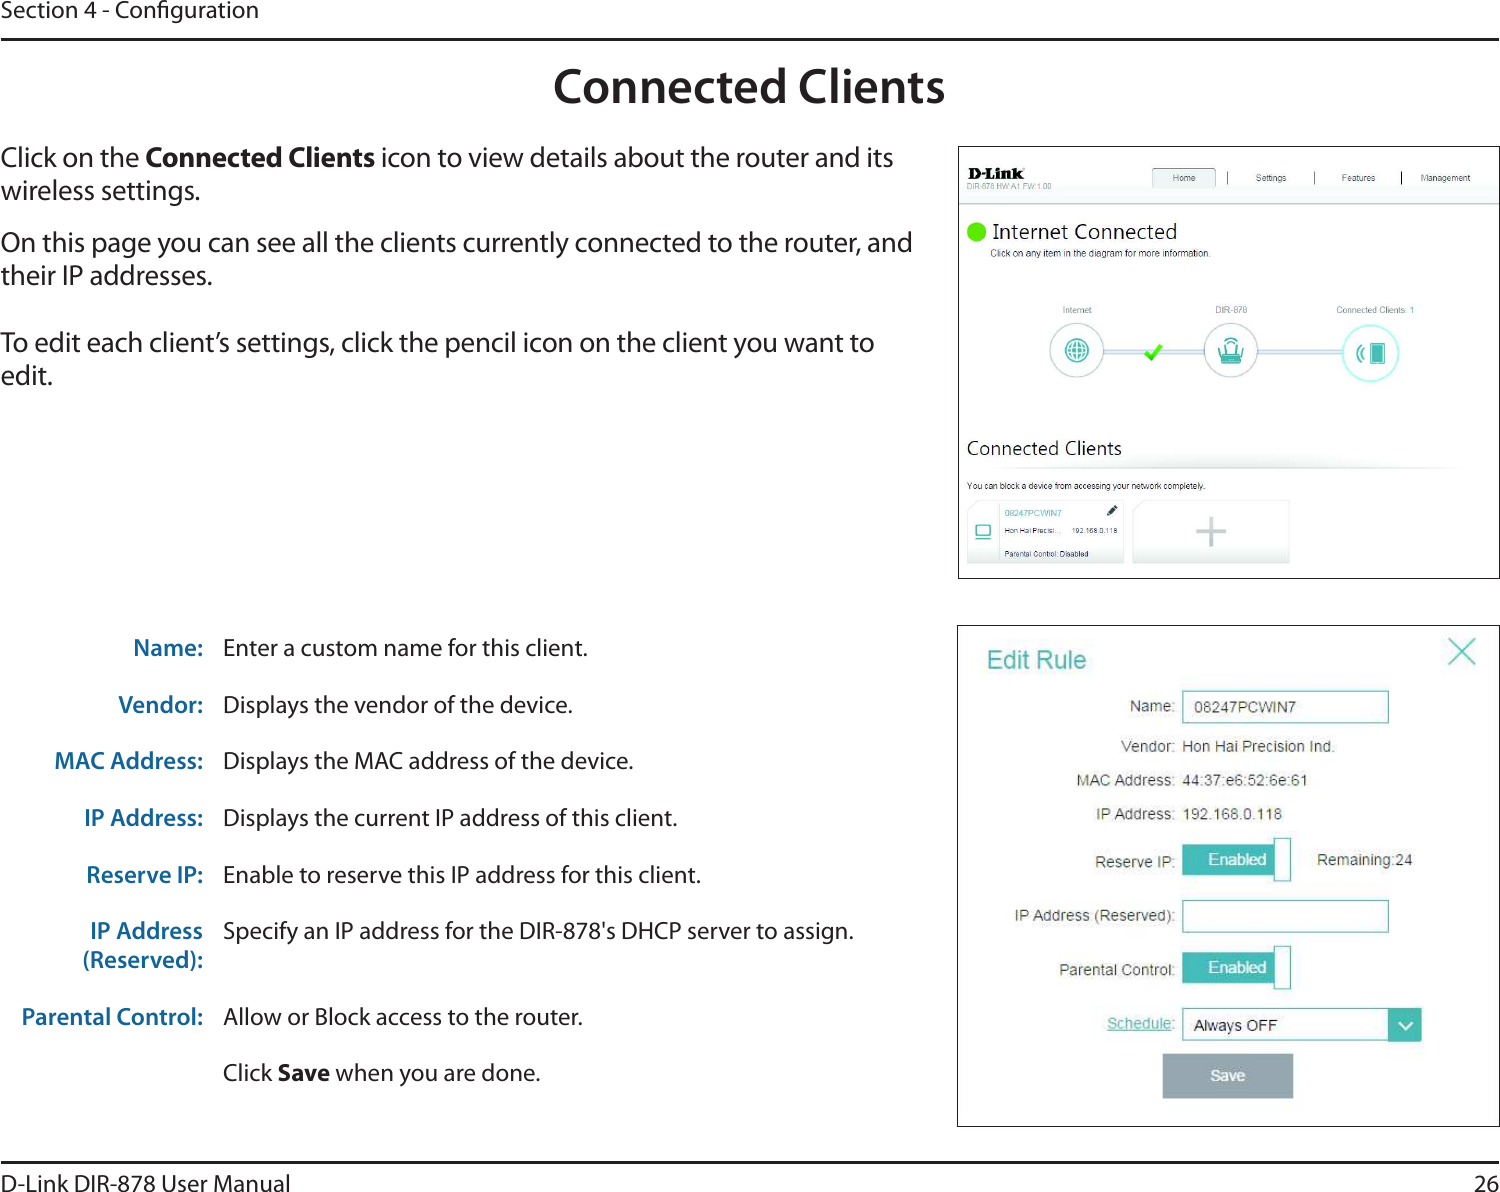 26D-Link DIR-878 User ManualSection 4 - CongurationConnected ClientsClick on the Connected Clients icon to view details about the router and its wireless settings.On this page you can see all the clients currently connected to the router, and their IP addresses.To edit each client’s settings, click the pencil icon on the client you want to edit.Name: Enter a custom name for this client.Vendor: Displays the vendor of the device.MAC Address: Displays the MAC address of the device.IP Address: Displays the current IP address of this client.Reserve IP: Enable to reserve this IP address for this client.IP Address (Reserved):Specify an IP address for the DIR-878&apos;s DHCP server to assign.Parental Control: Allow or Block access to the router.Click Save when you are done.